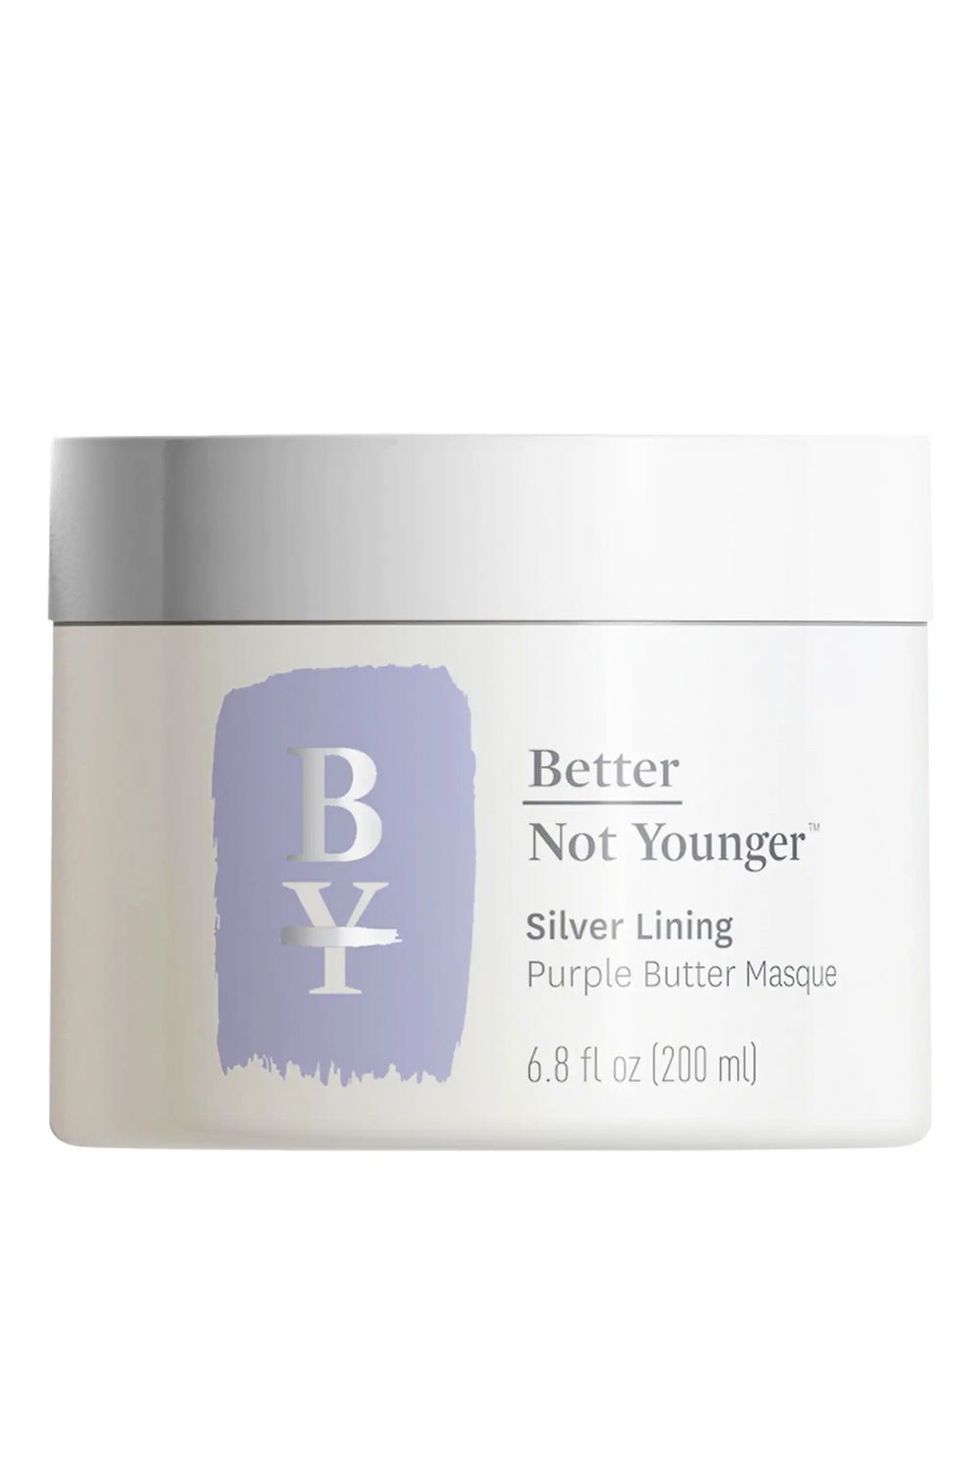 Better Not Younger Silver Lining Purple Butter Masque